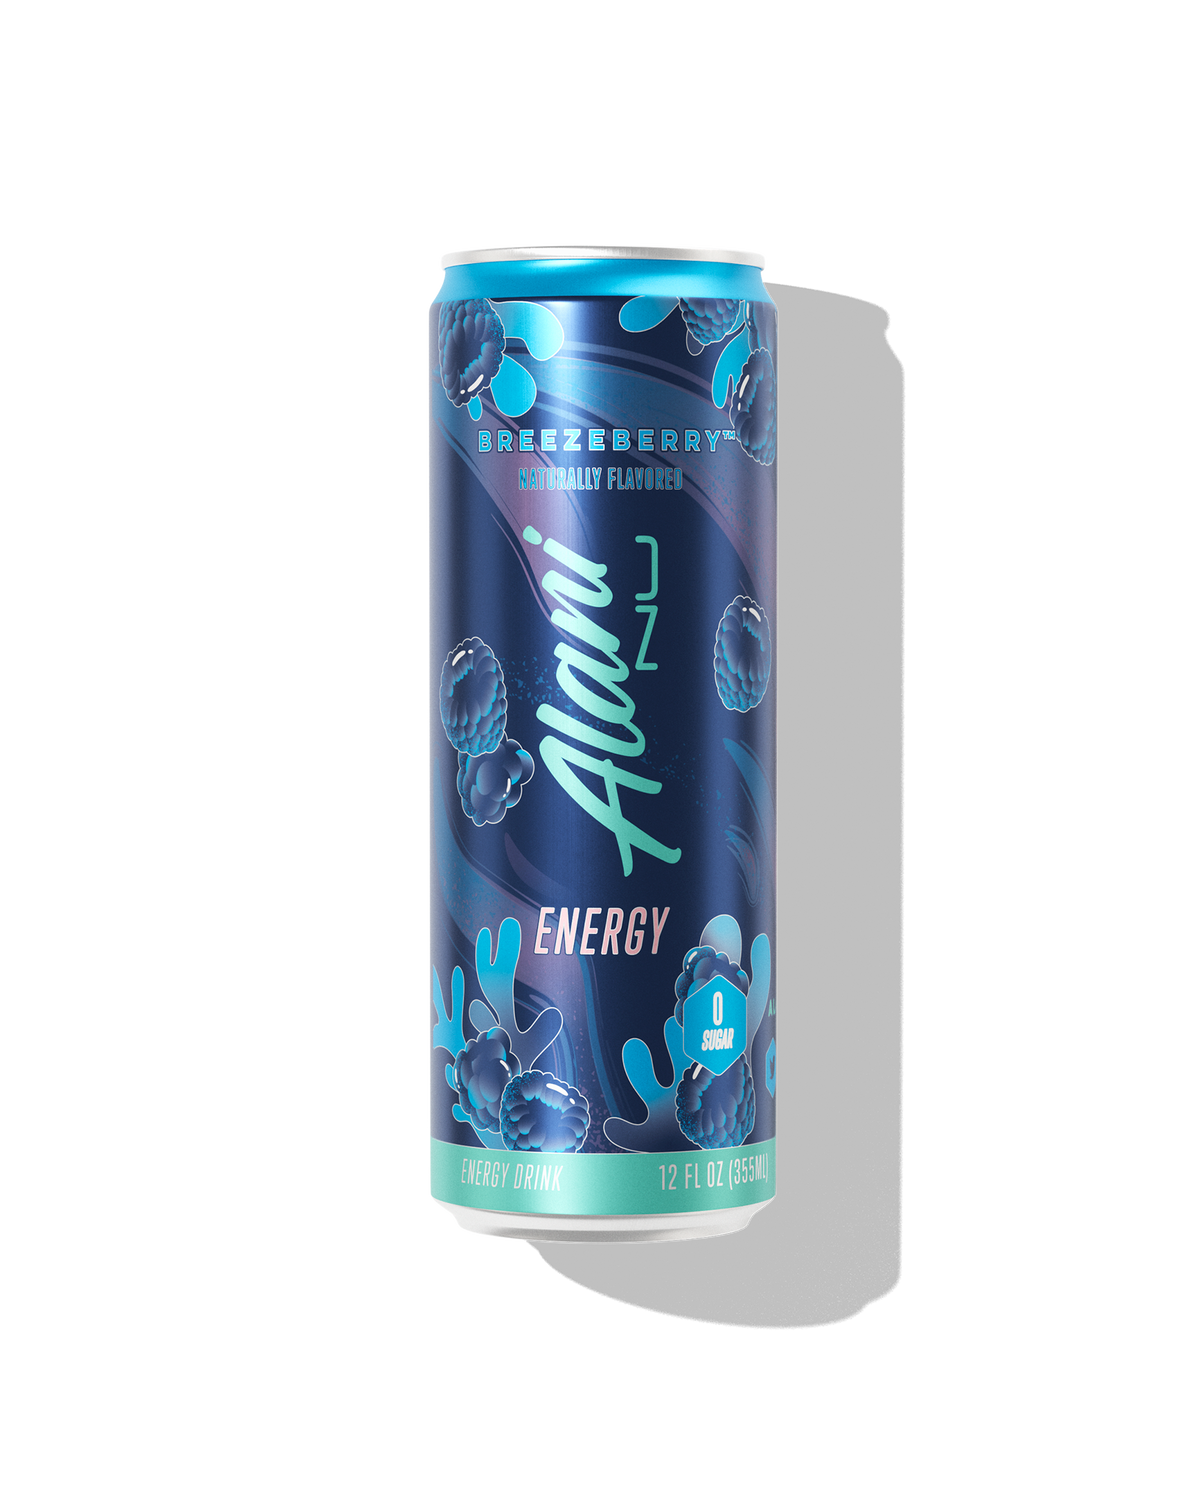 A 12 fl oz Energy Drink in Breezeberry flavor.